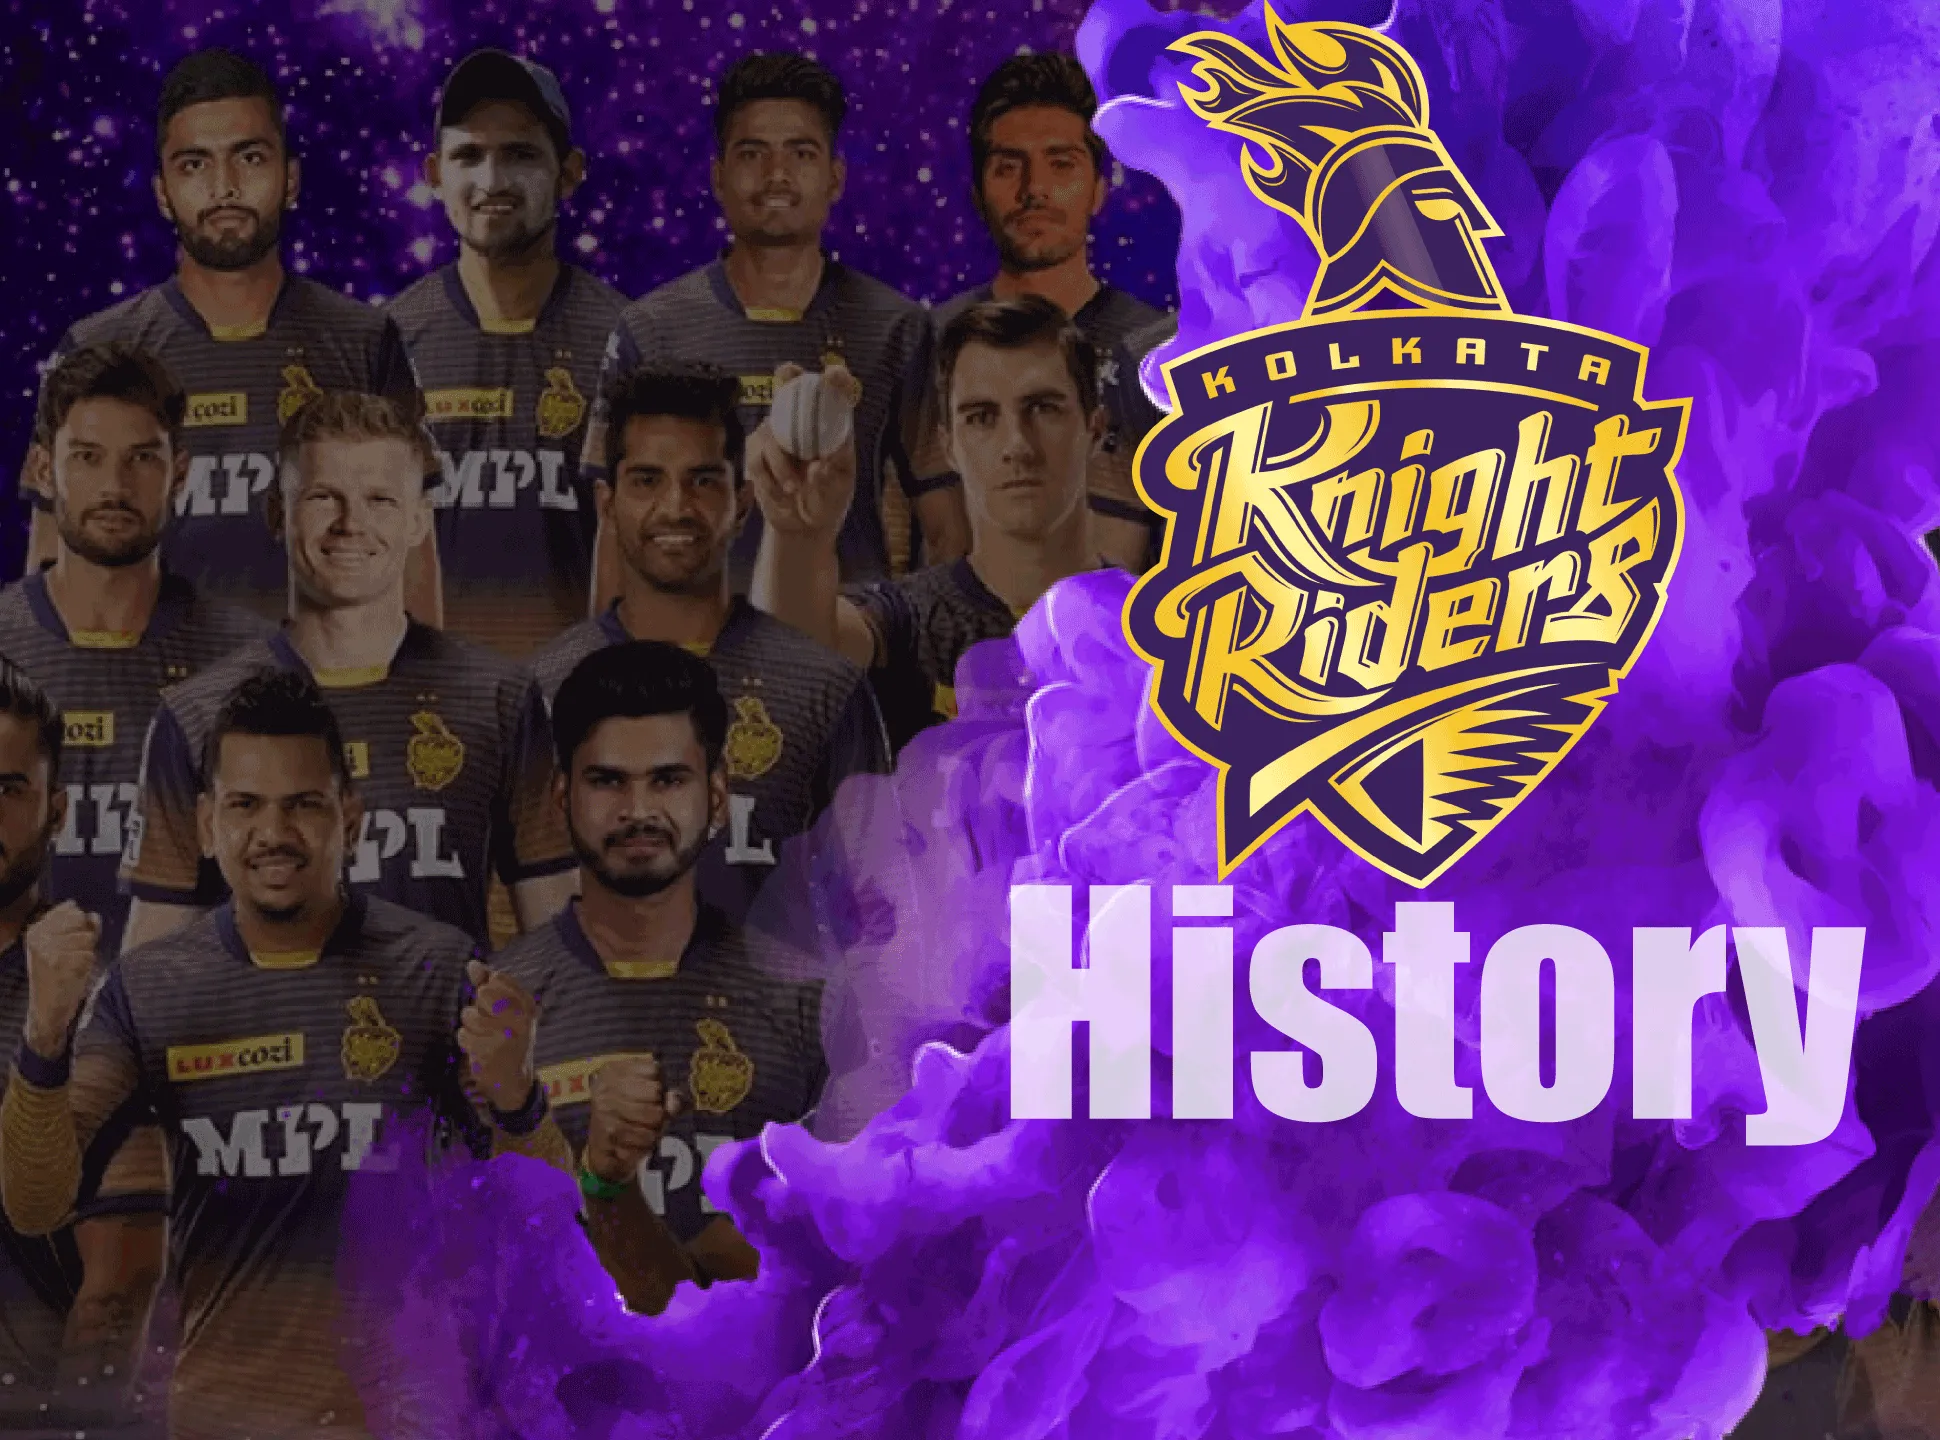 Kolkata Knight RIders is one of the most successful team in the IPL history.